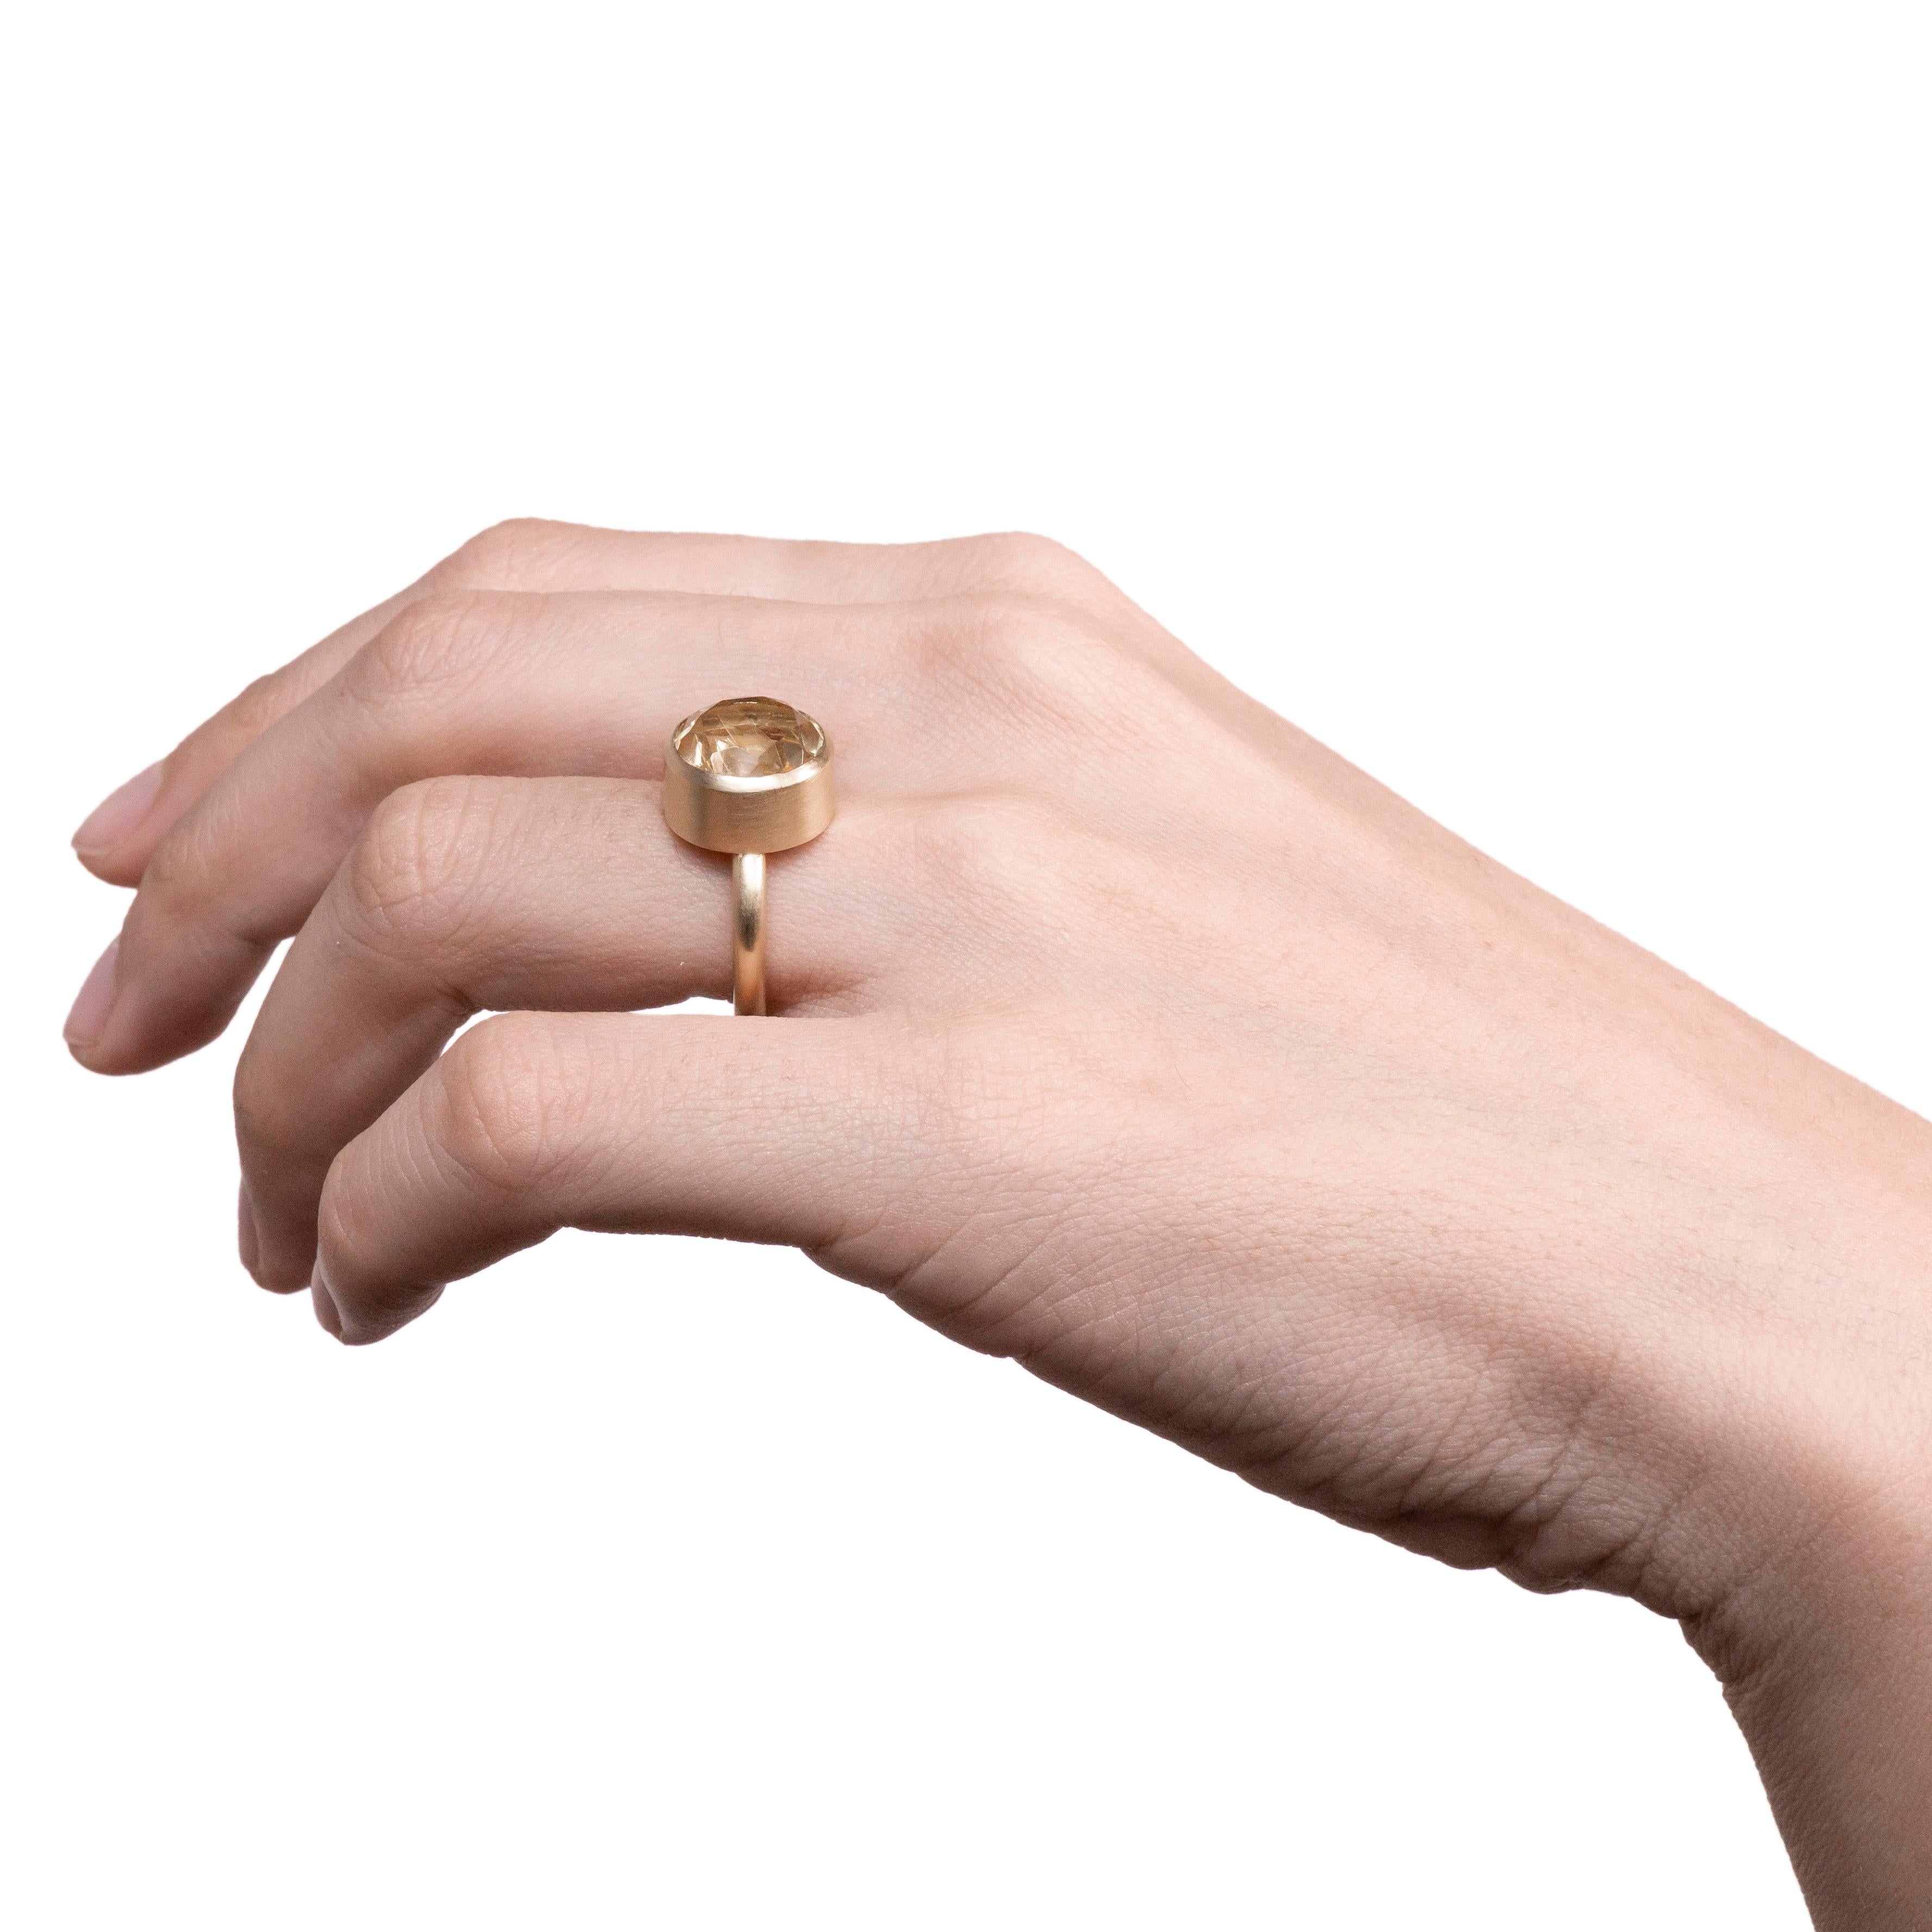 This bold and minimal statement ring is a modern take on the cocktail ring. It features a stone that is fashioned from two natural colored stones that have been fused together then cut and polished as one. When the two characteristics of the